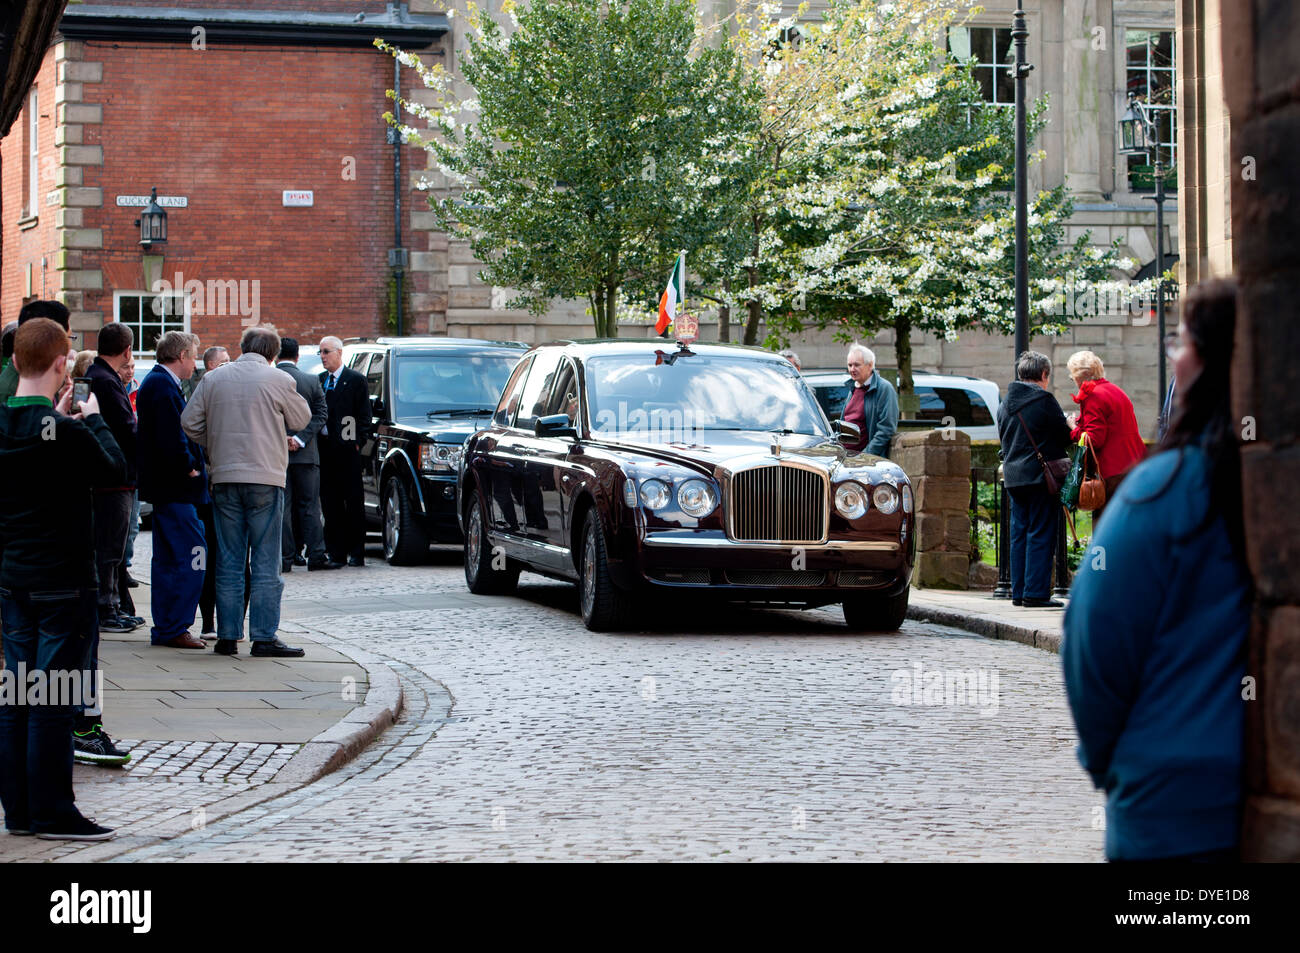 892 Royal Limousine Stock Photos HighRes Pictures and Images  Getty  Images